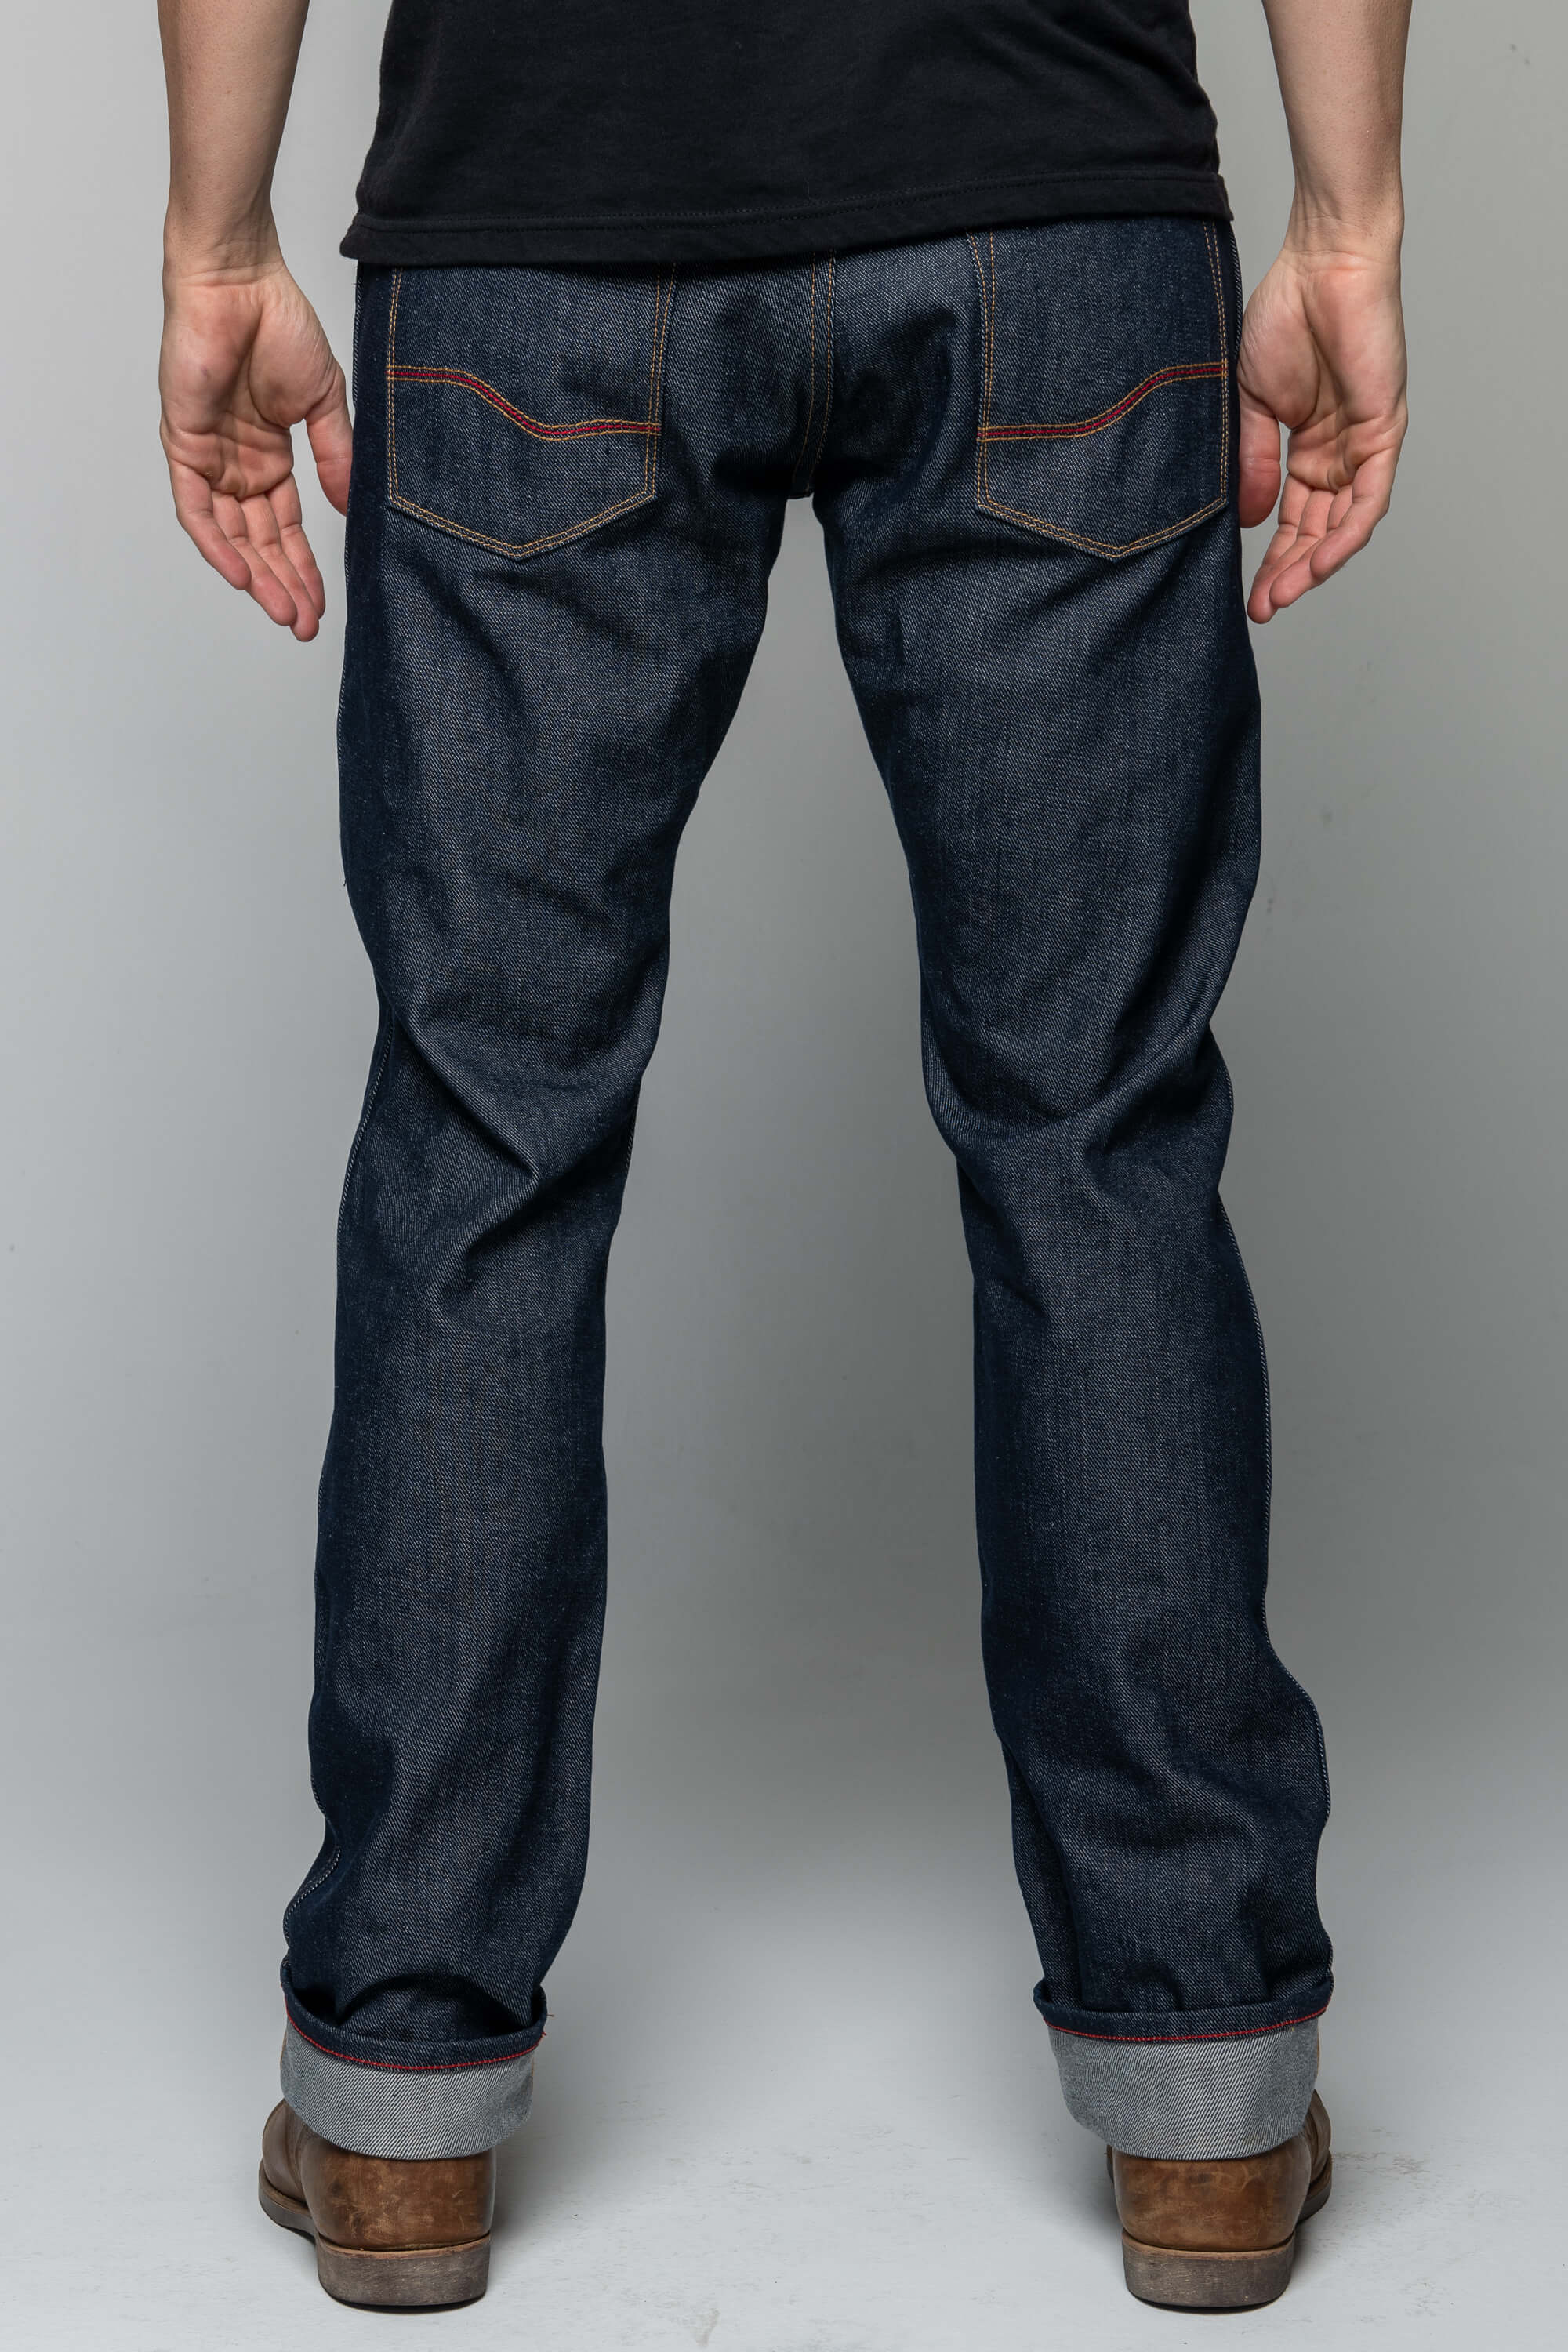 Caballo Relaxed Fit Indigo Protective Riding Jeans - Feat